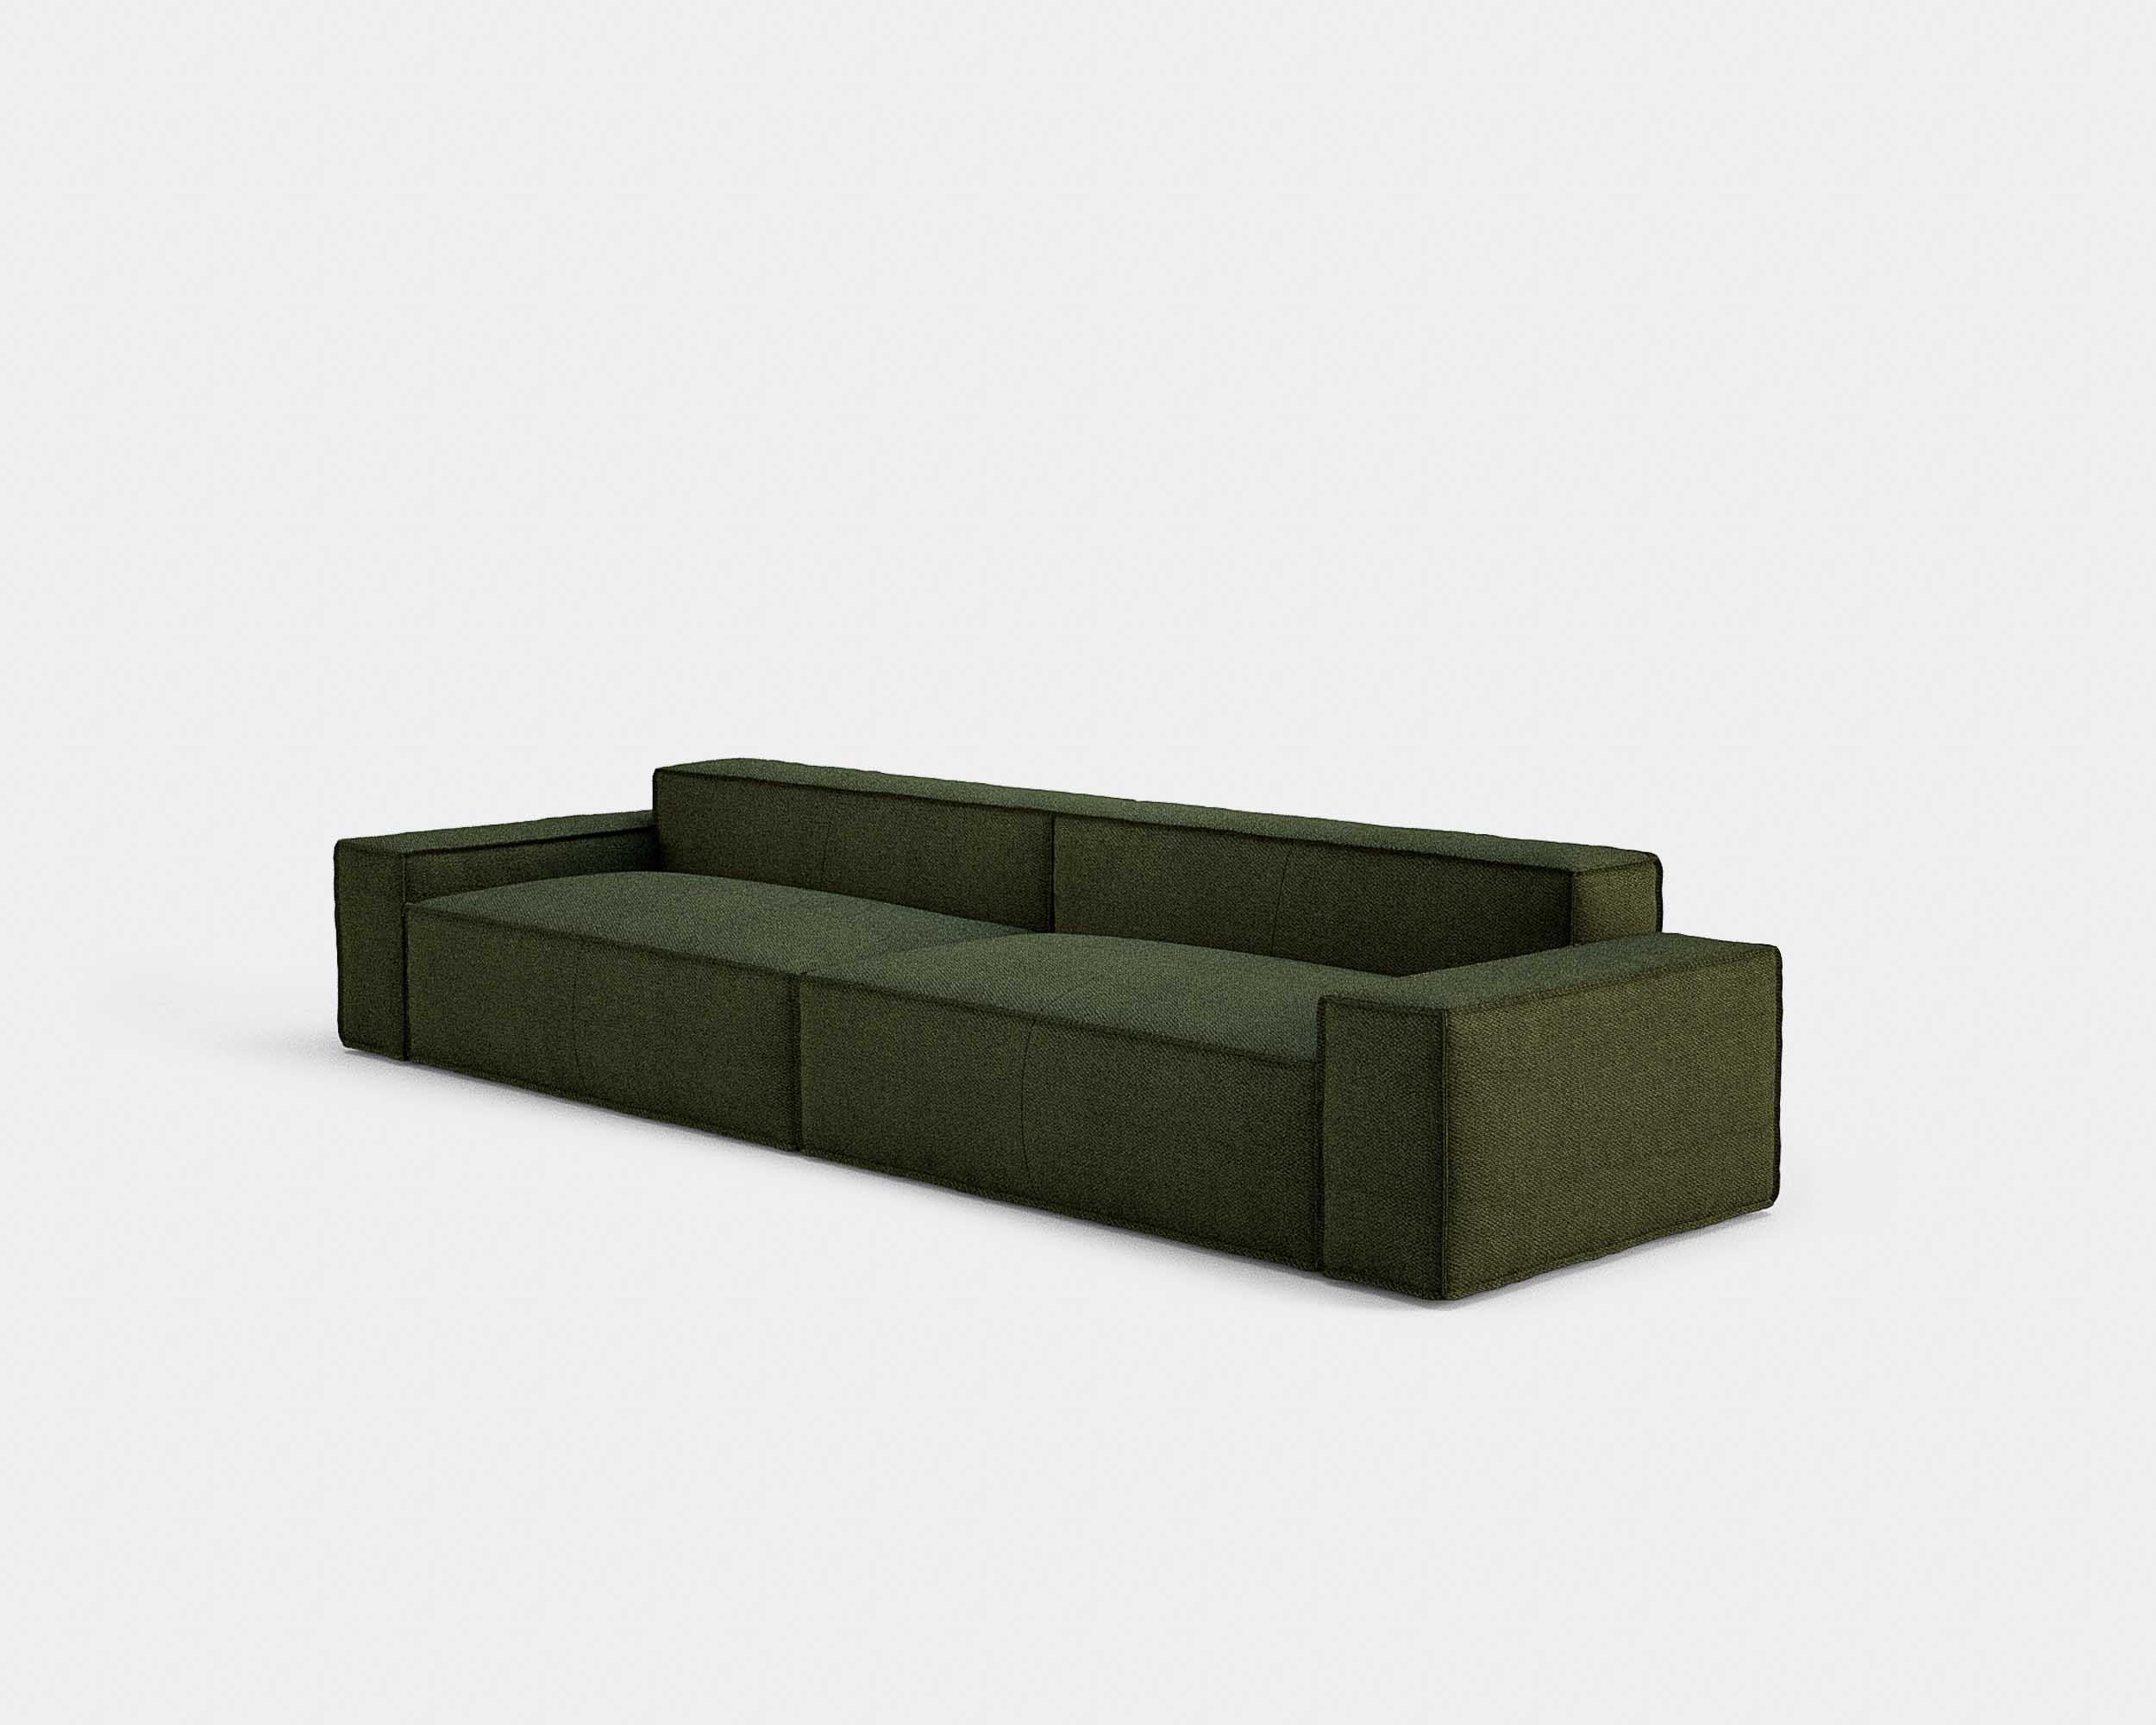 Davis Sofa by Amura Lab
Model 021 + 022

Dimensions: H. 67 x 340 x 100 cm

Fabric reference in picture : Brera 850 - White 01
(Non-contractual fabric rendering)

More modules available in different fabrics and colors
 
“A refined game of